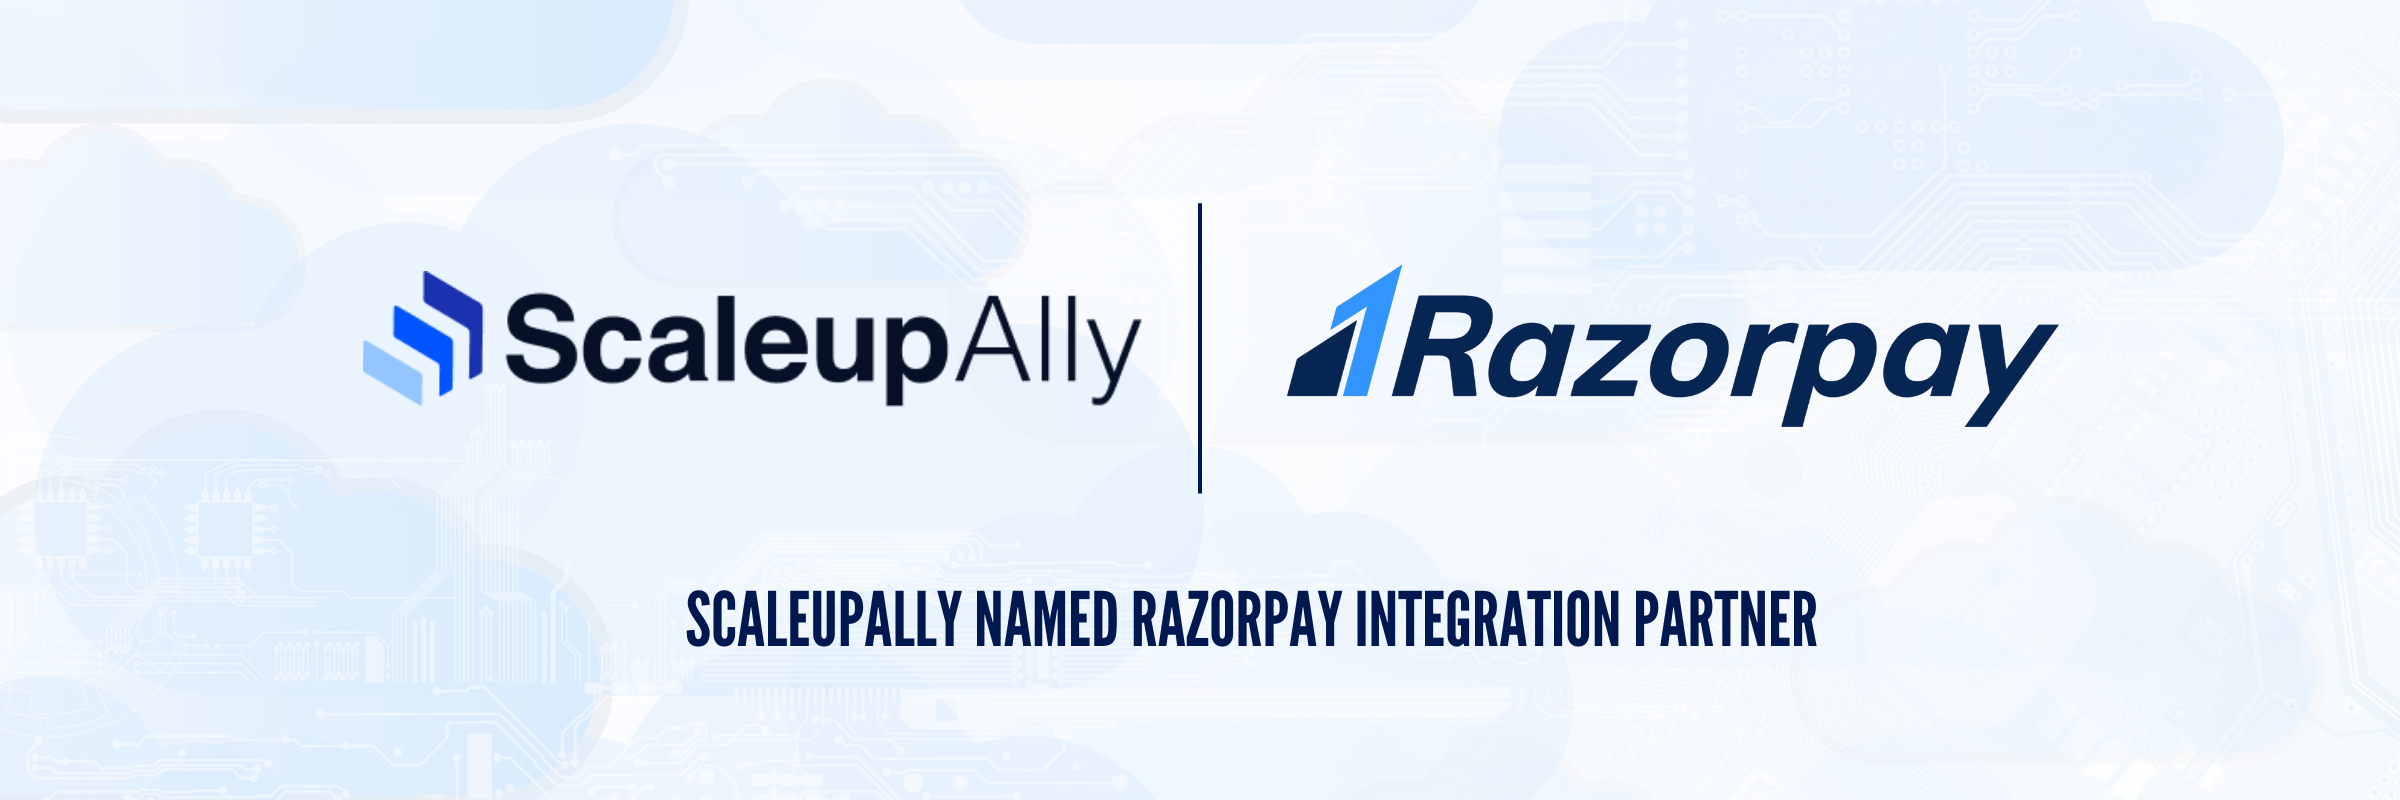 ScaleupAlly Named Razorpay Integration Partner, Expanding Payment Solutions for Clients